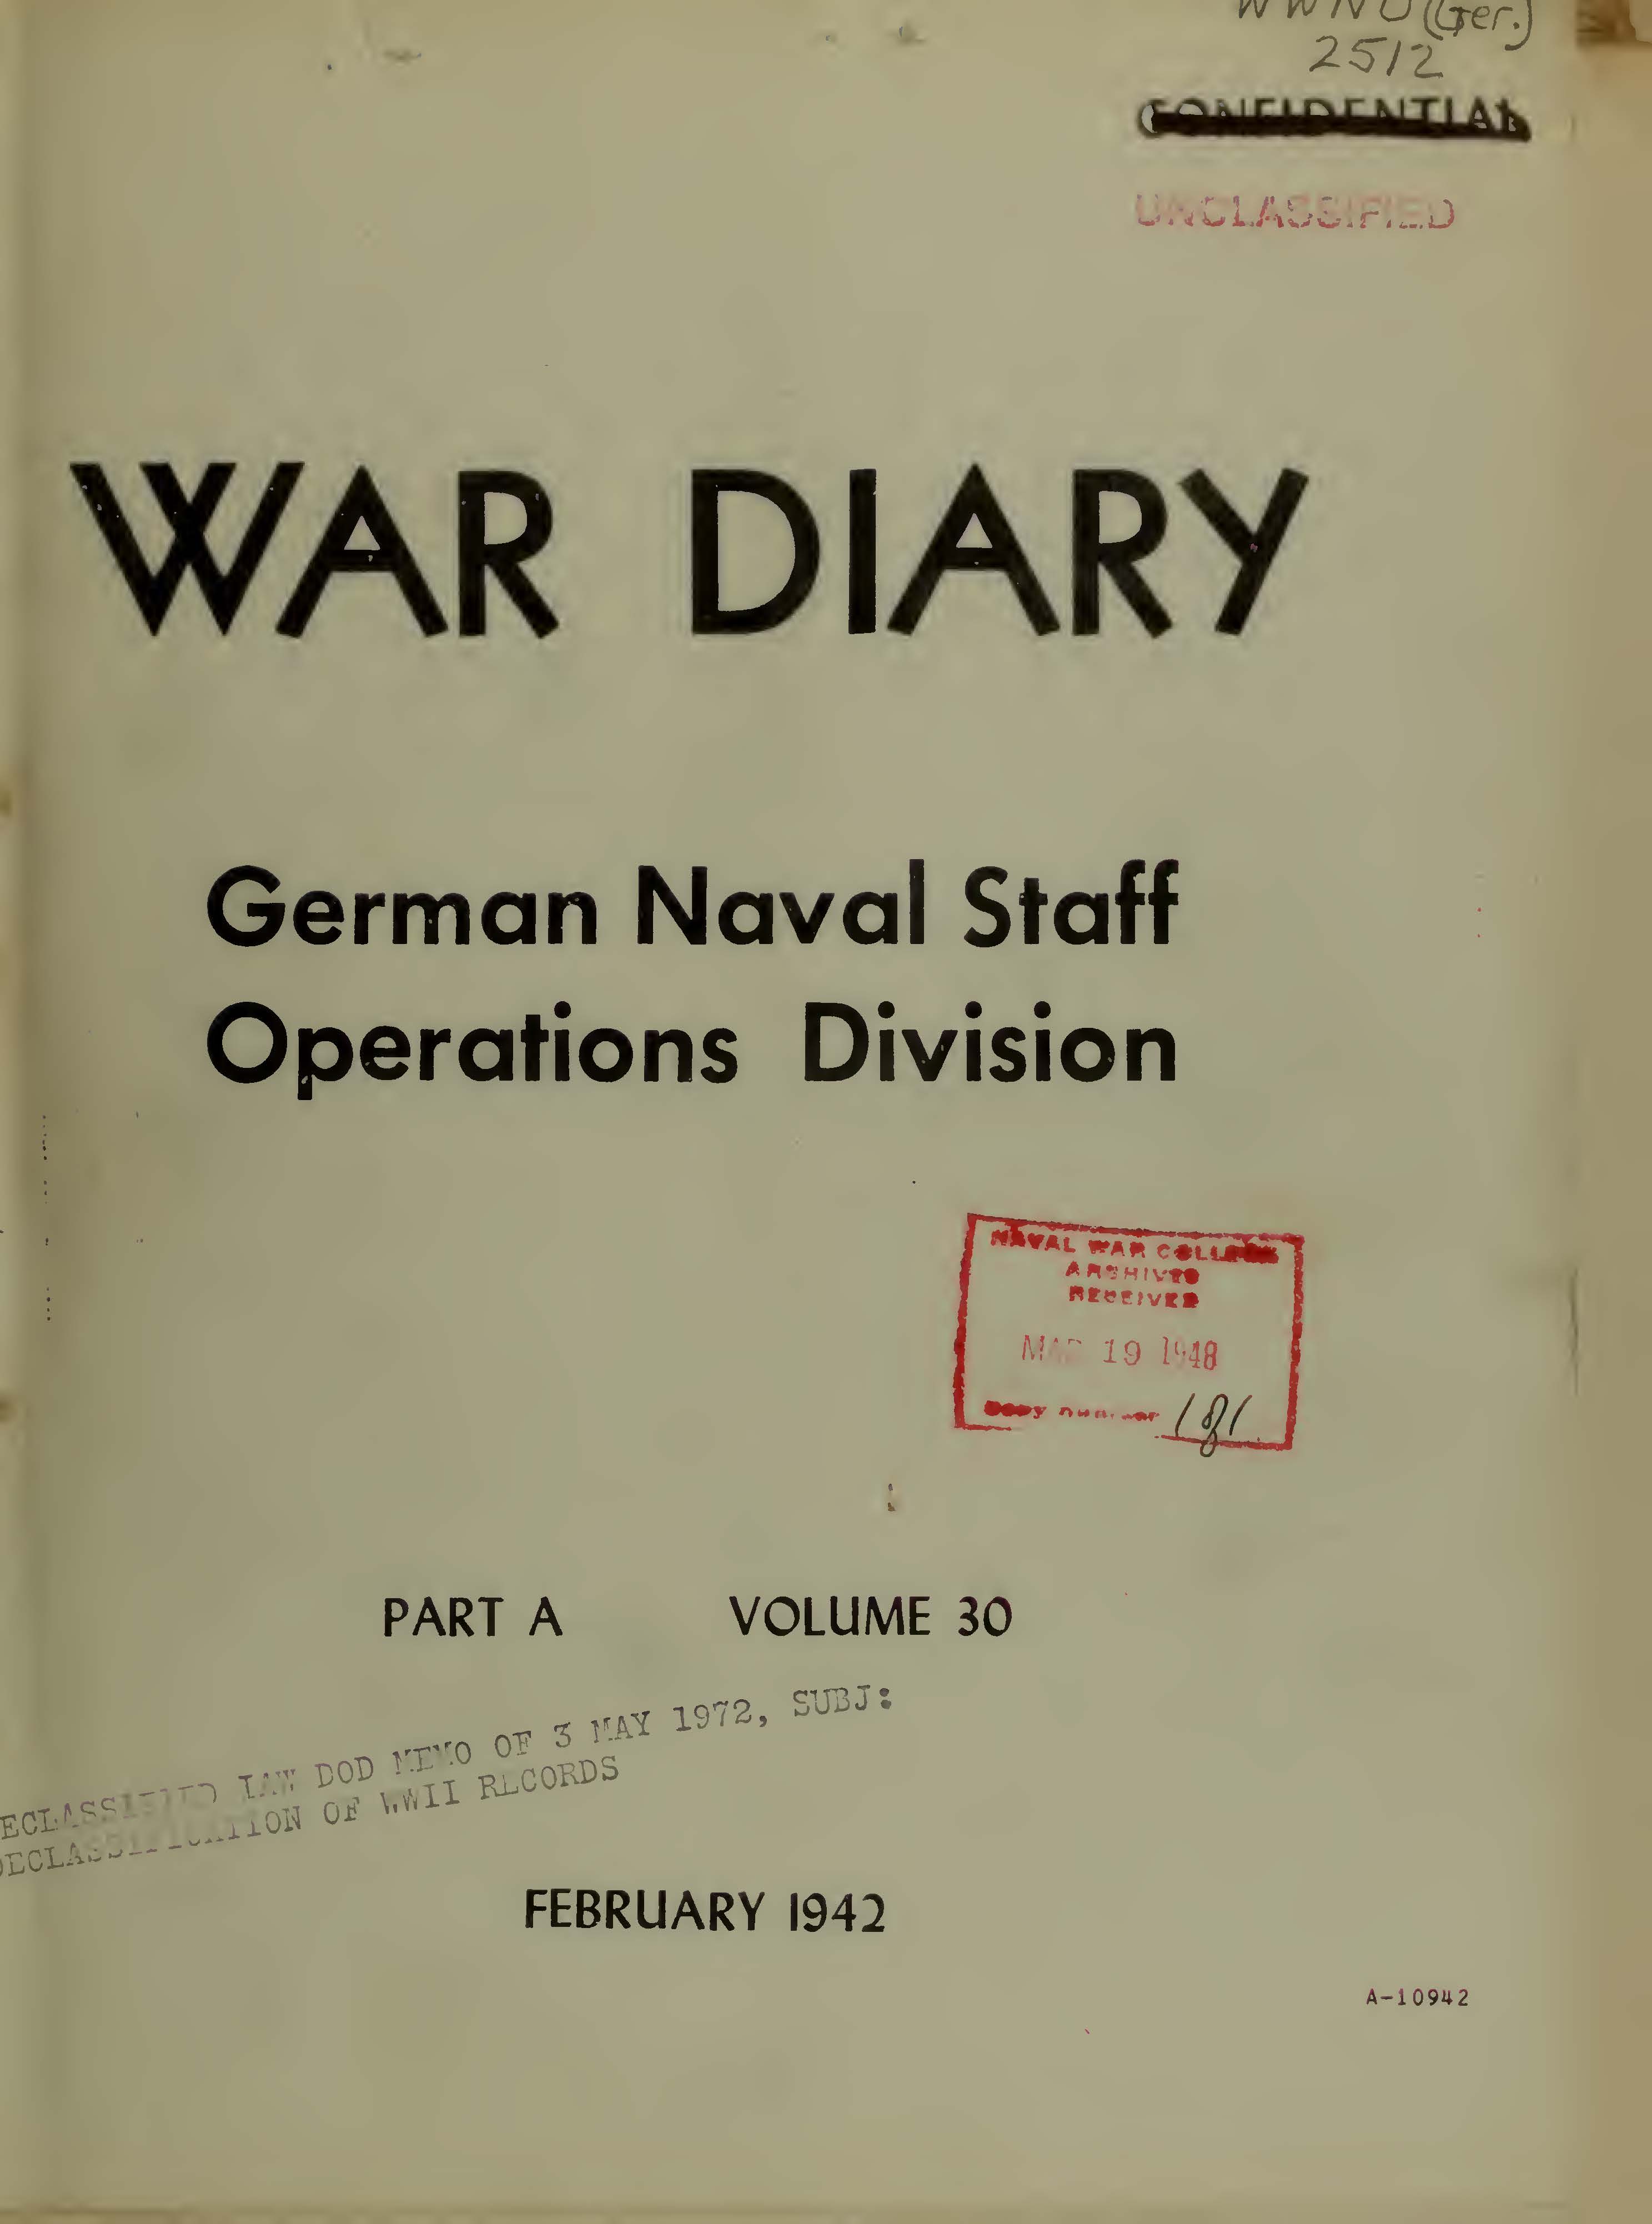 War Diary of German Naval Staff (Operations Division) Part A, Volume 30, February 1942